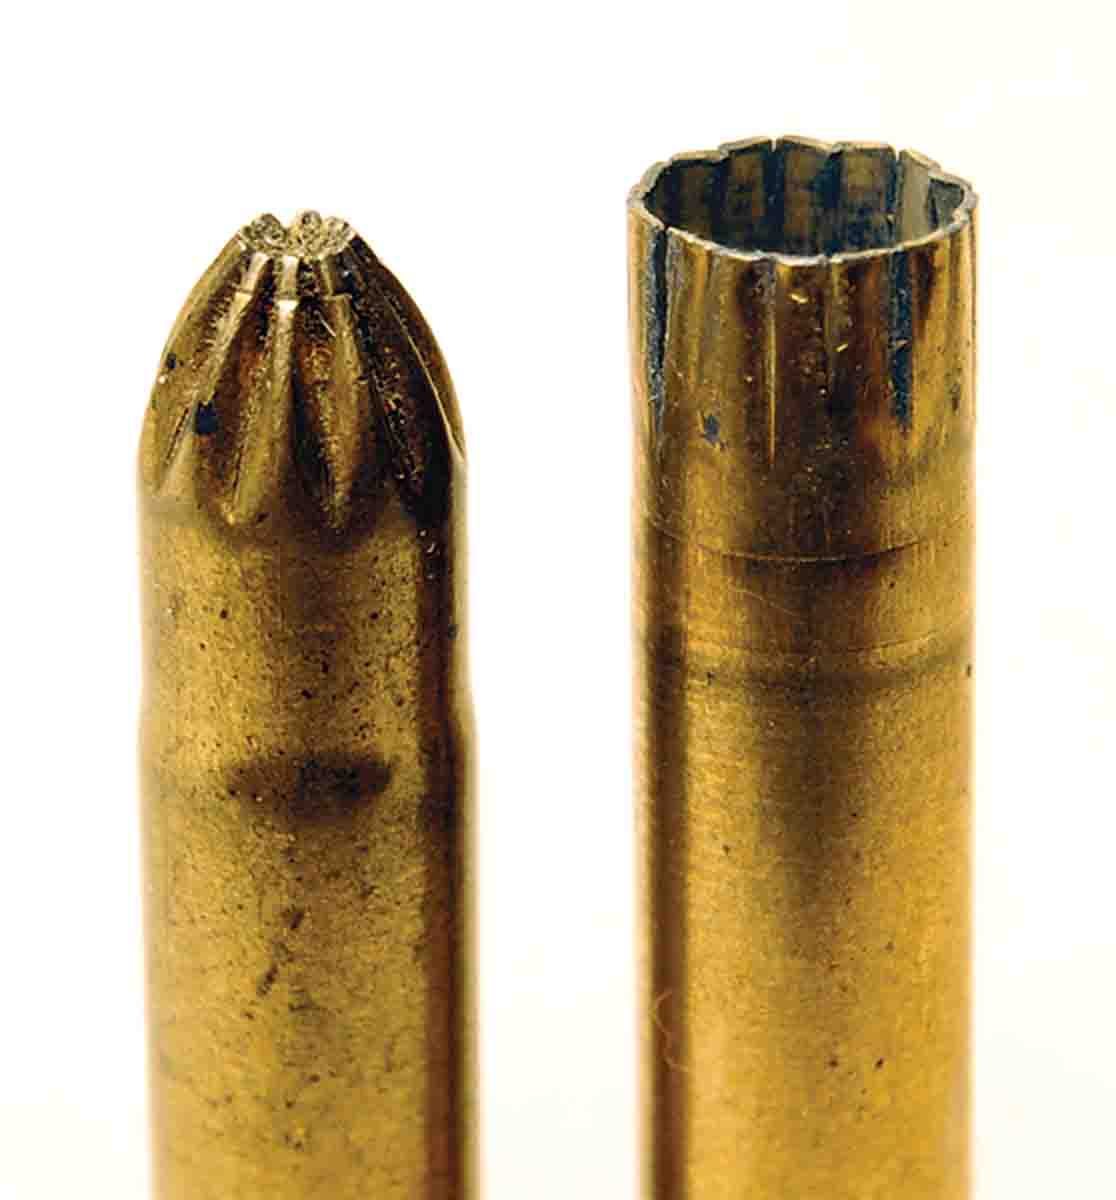 A close-up of a modern rose crimp and a fired shot cartridge, which shows that the crimp does open fully to release shot.